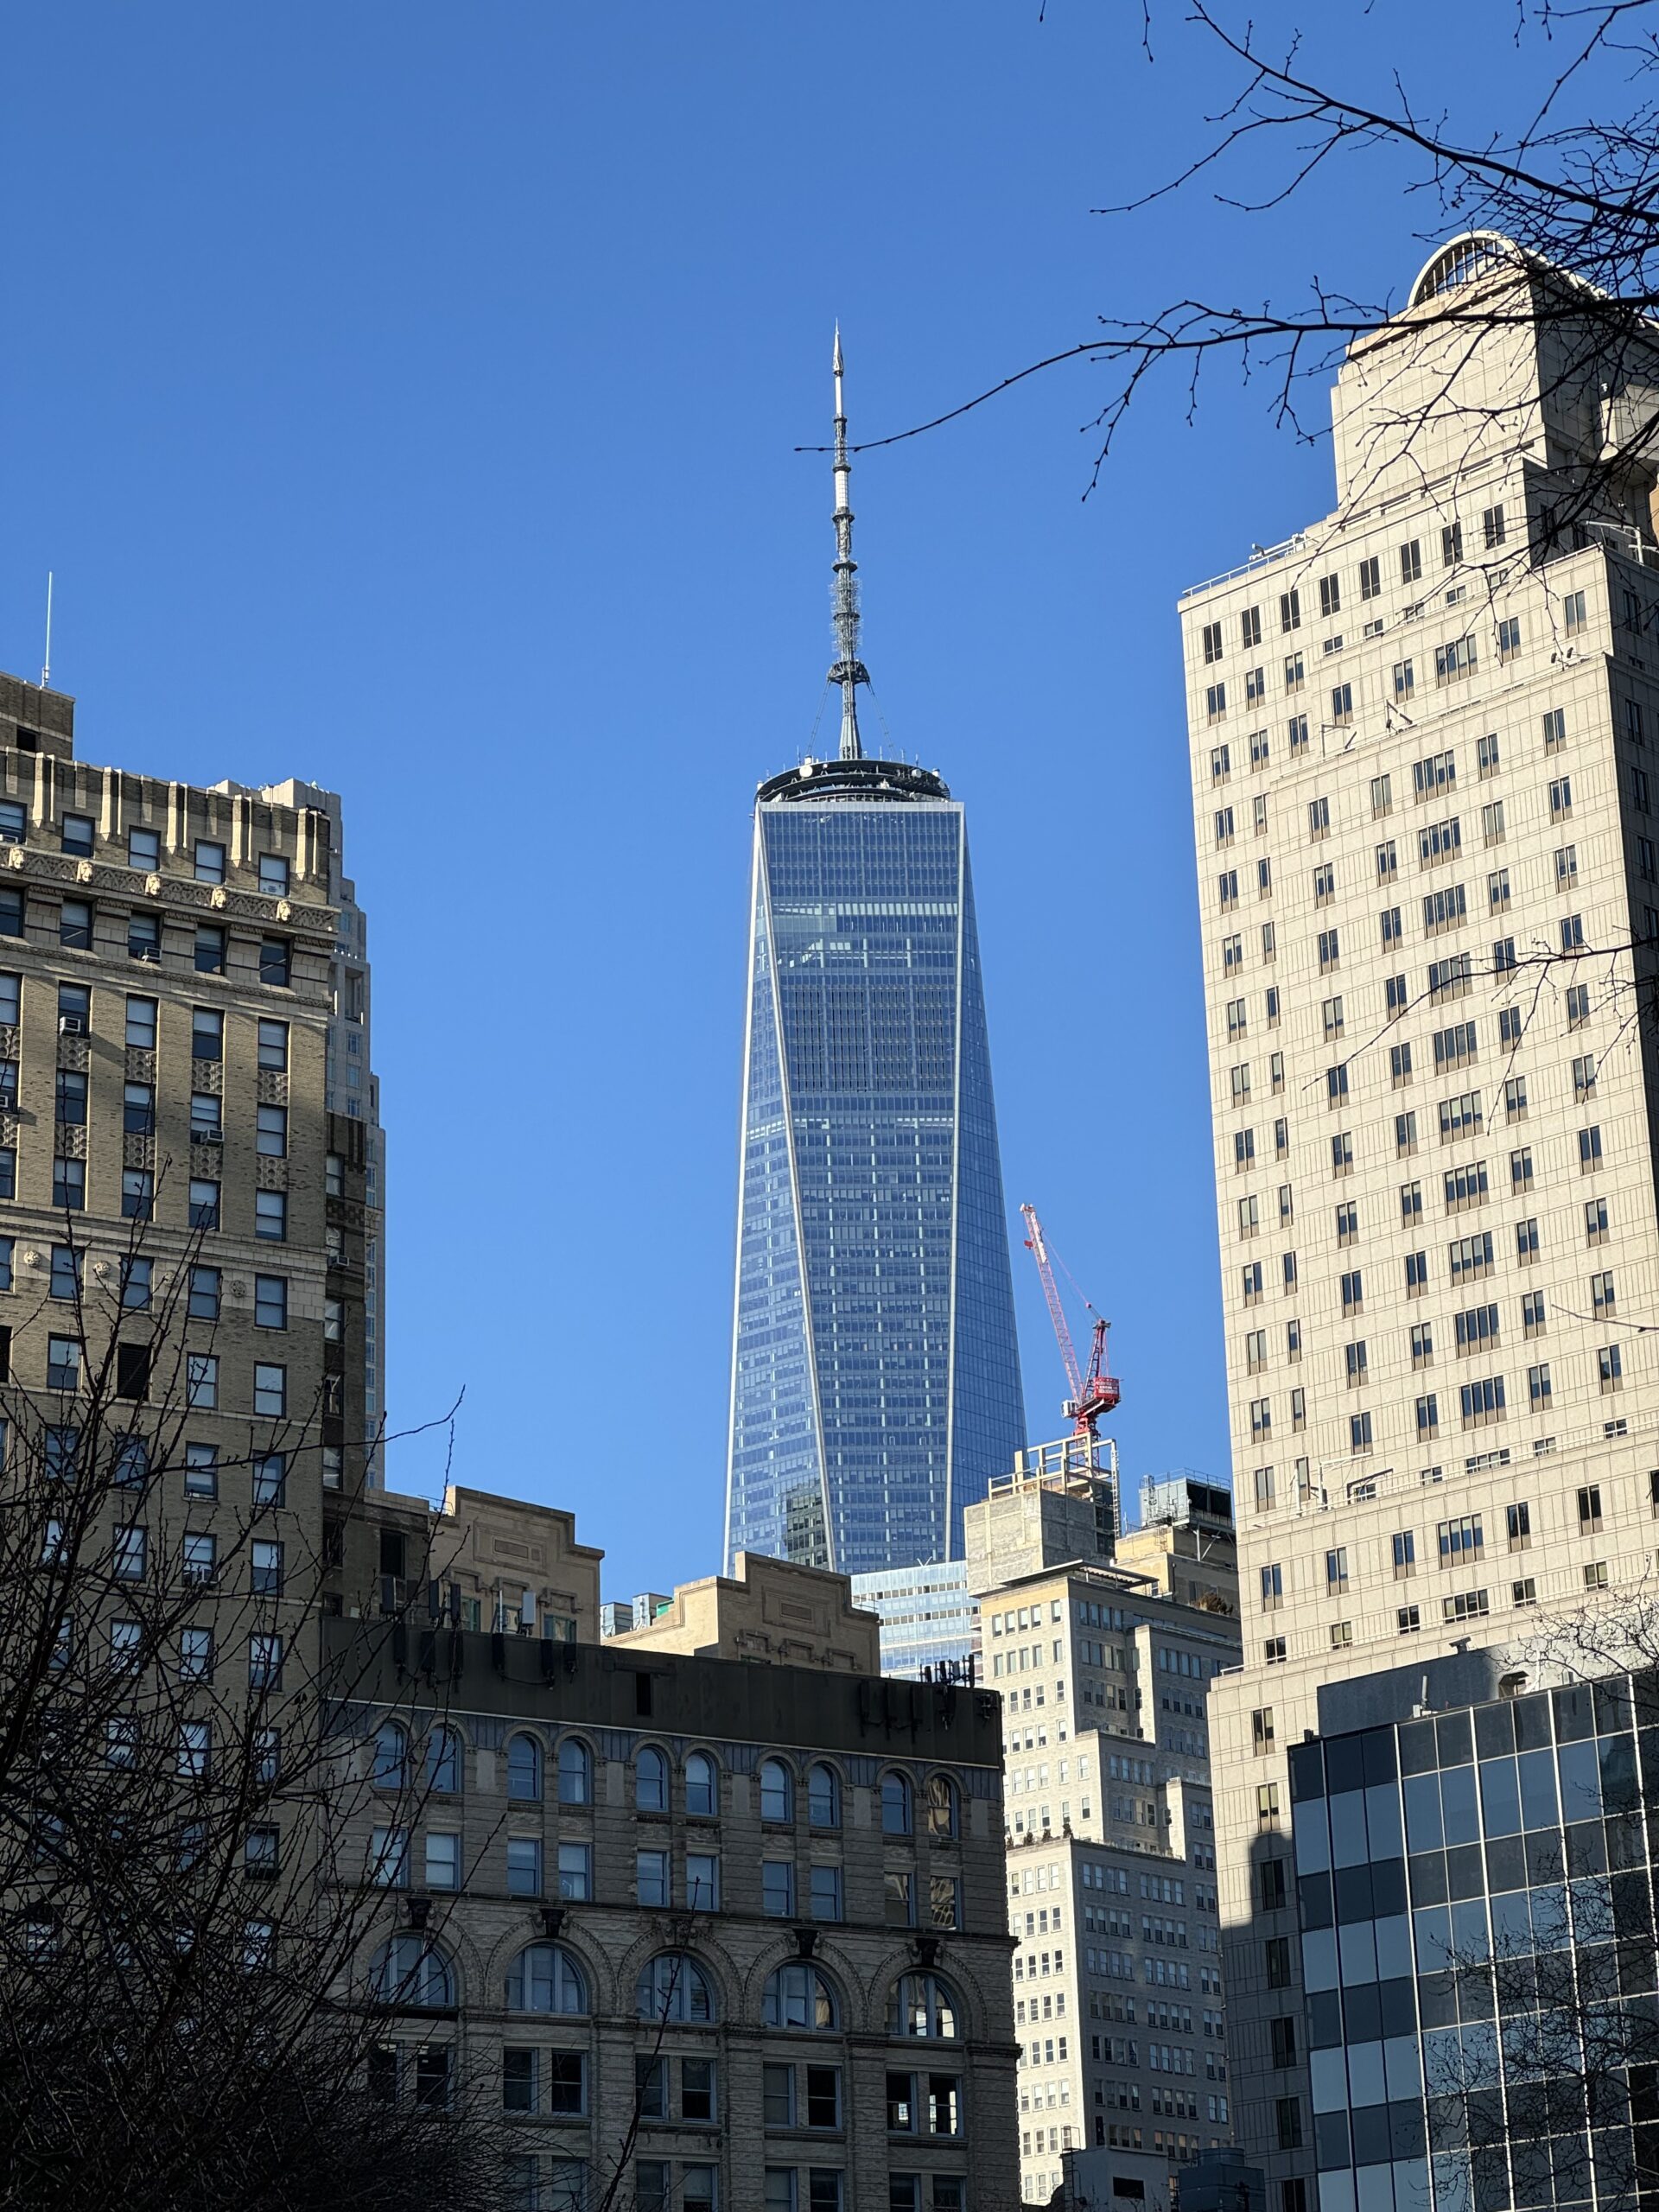 A photo of the Freedom Tower in New York City.